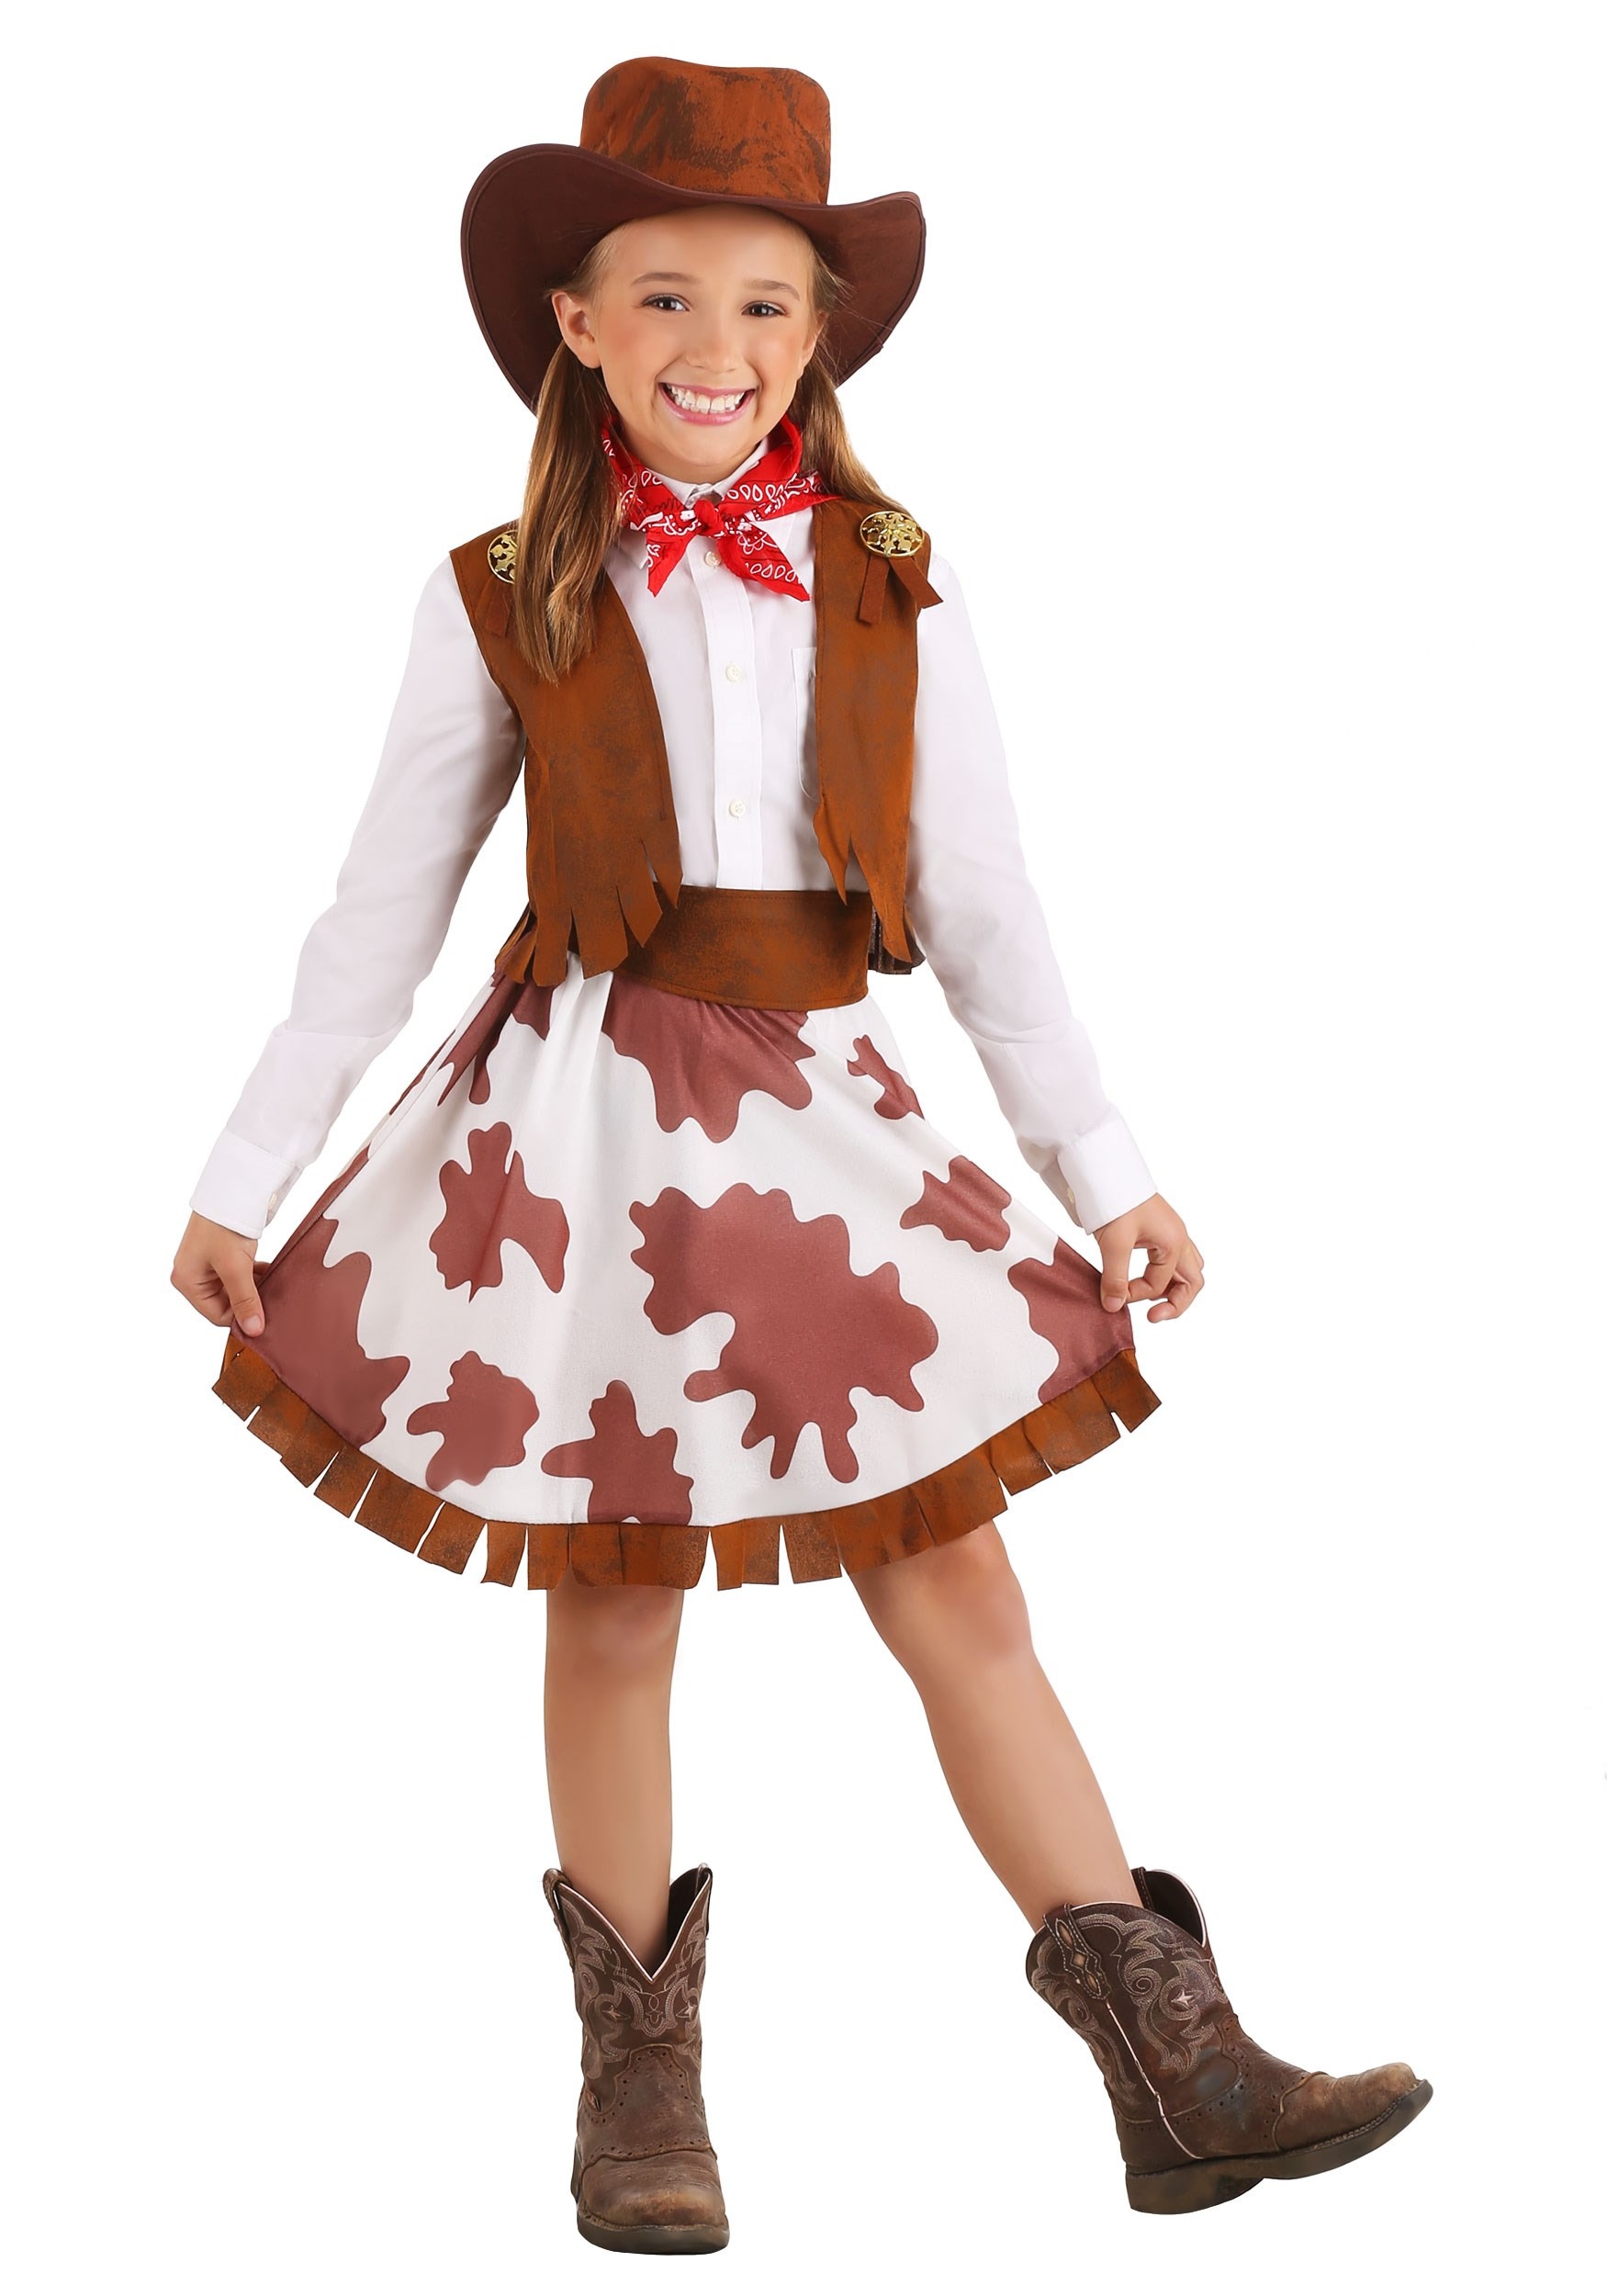 Photos - Fancy Dress Forum Novelties, Inc Girls Sweetheart Cowgirl Costume Brown/Red/Wh